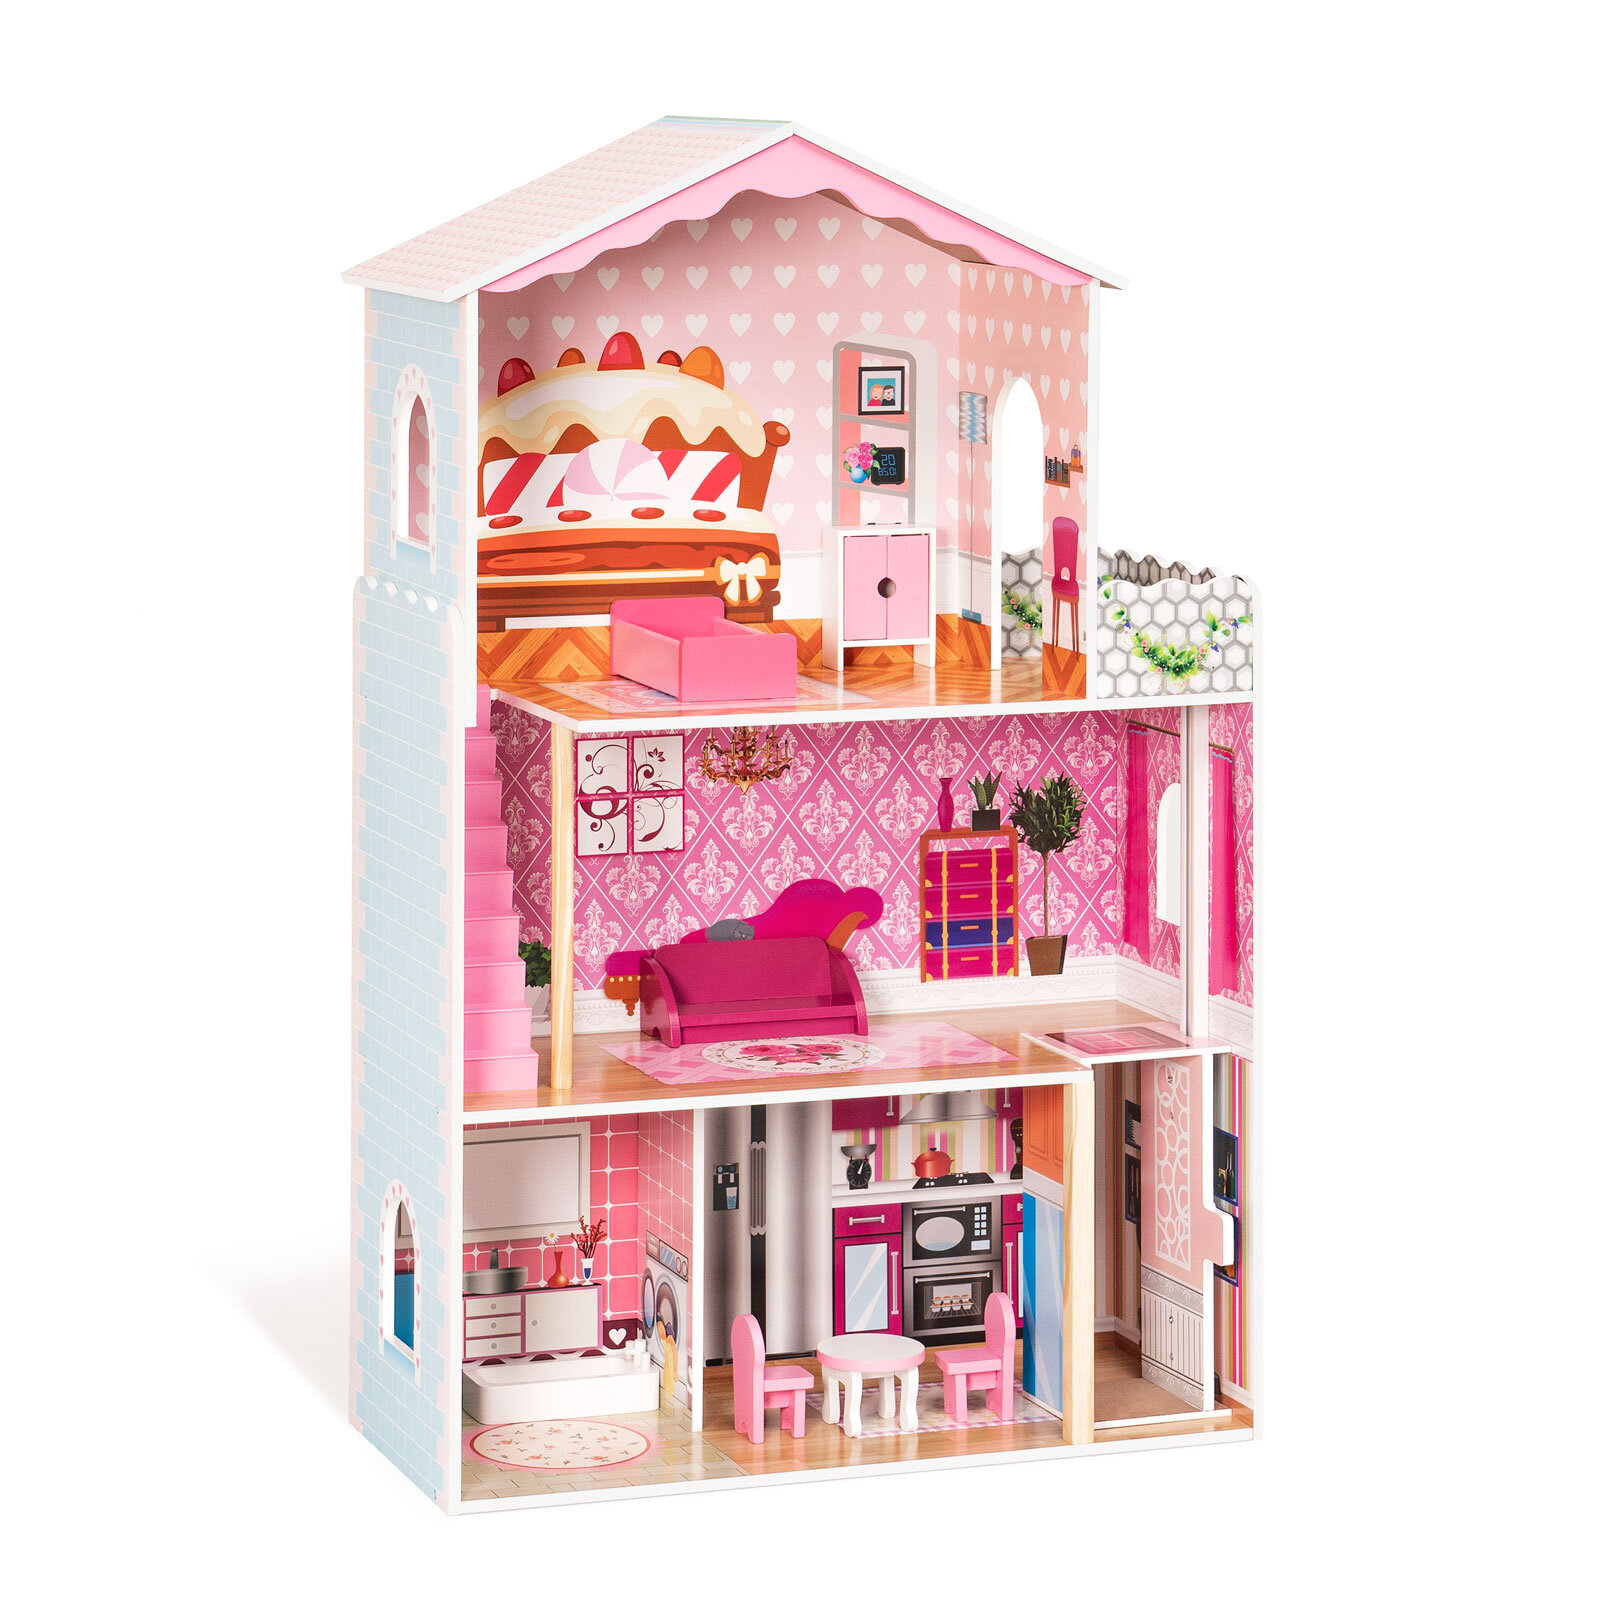 A Dreamhouse-Inspired Life-Sized Doll House Coming To HTX